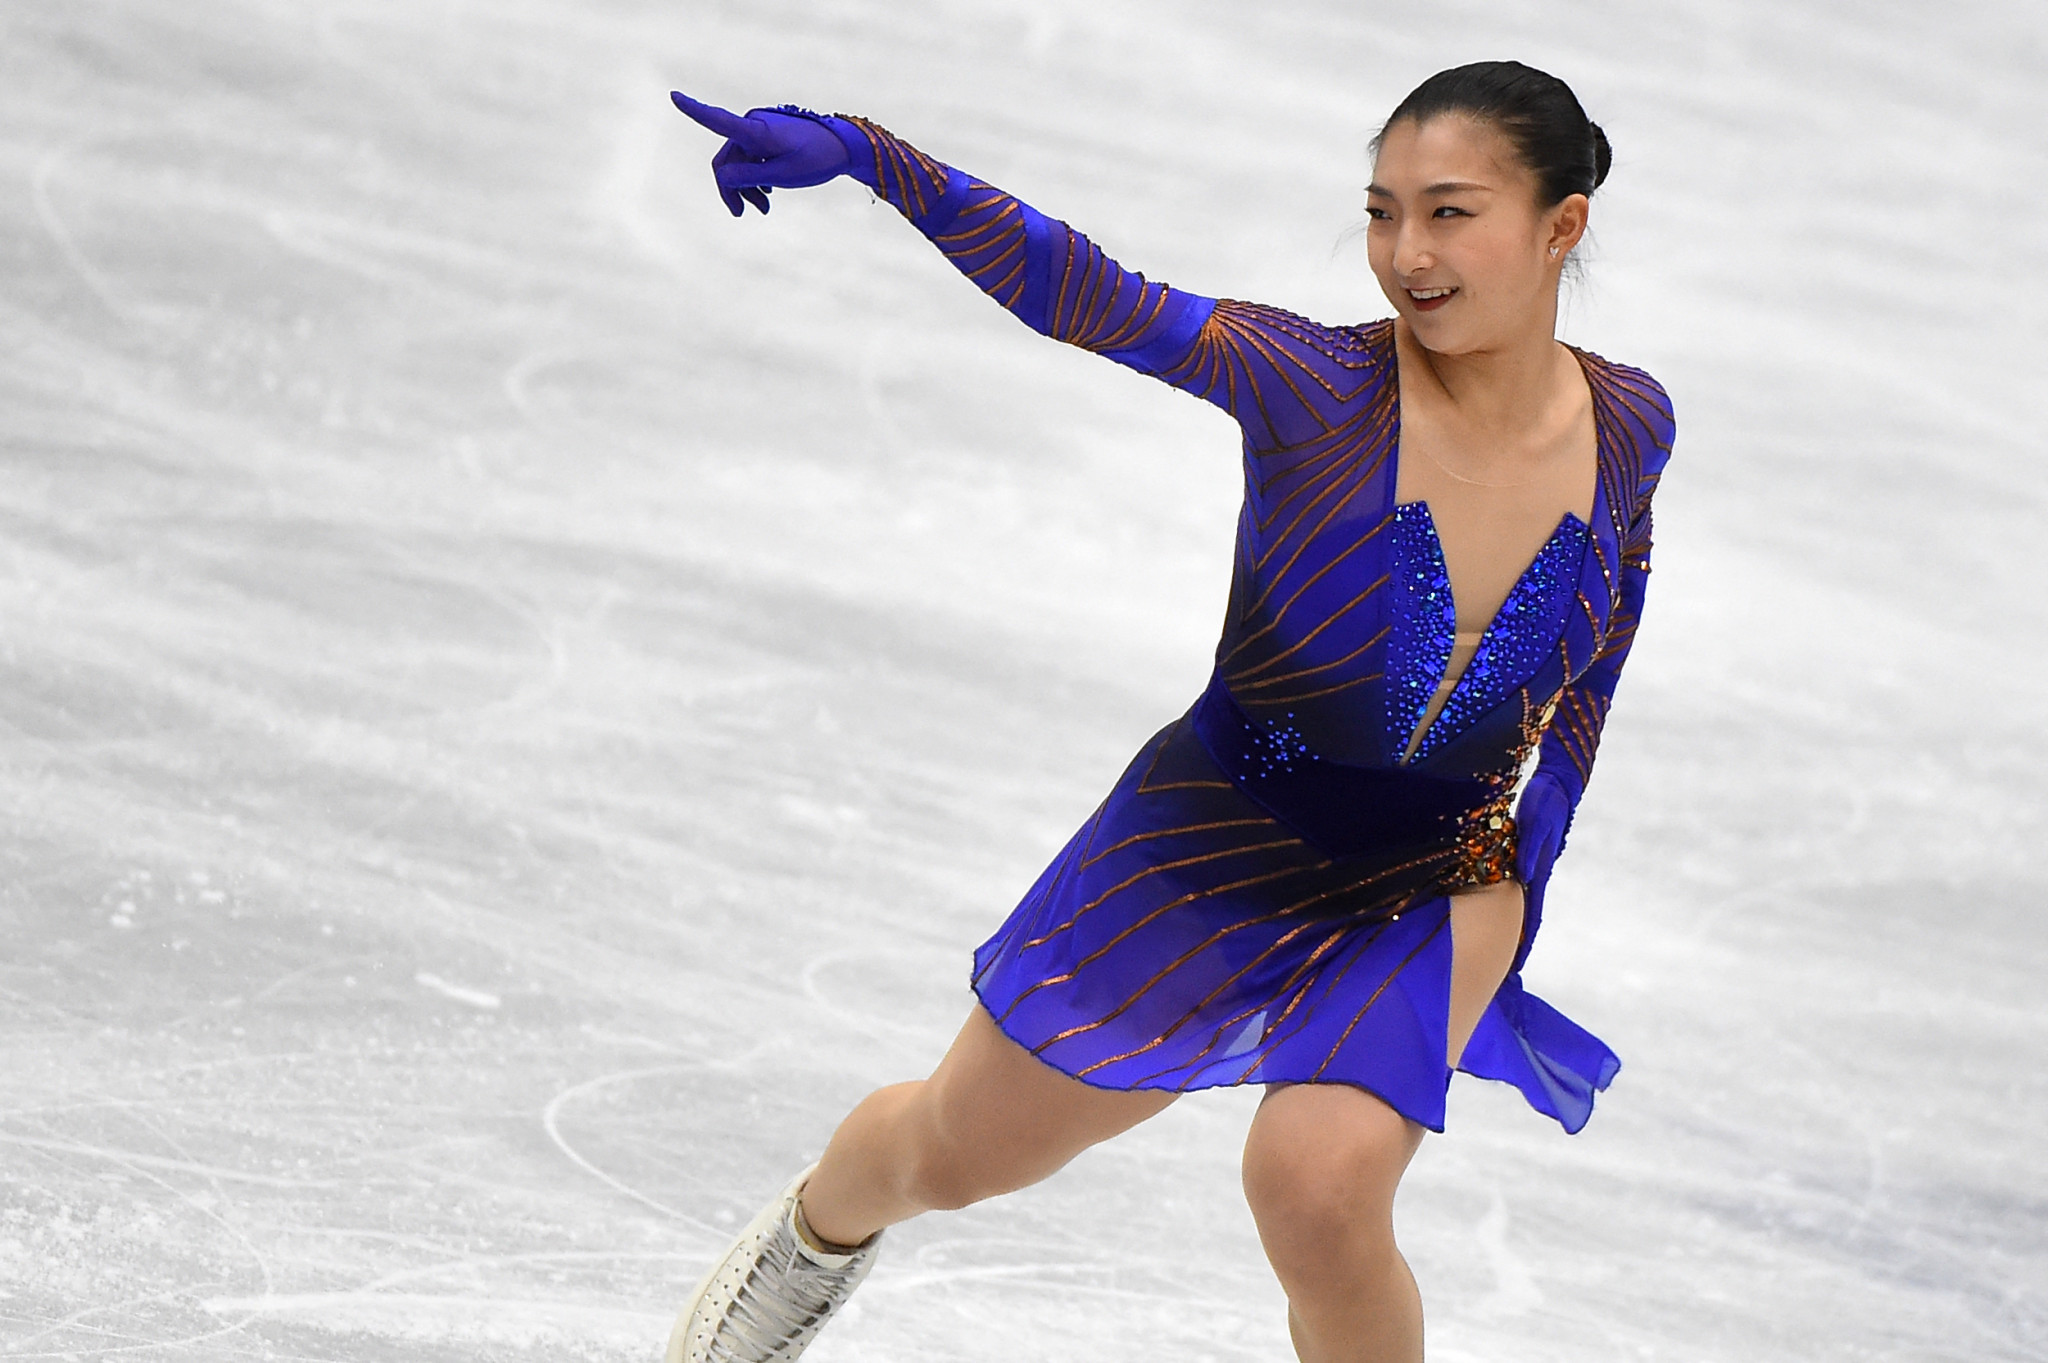 Kaori Sakamoto won her first world title today in Montpelier ©Getty Images